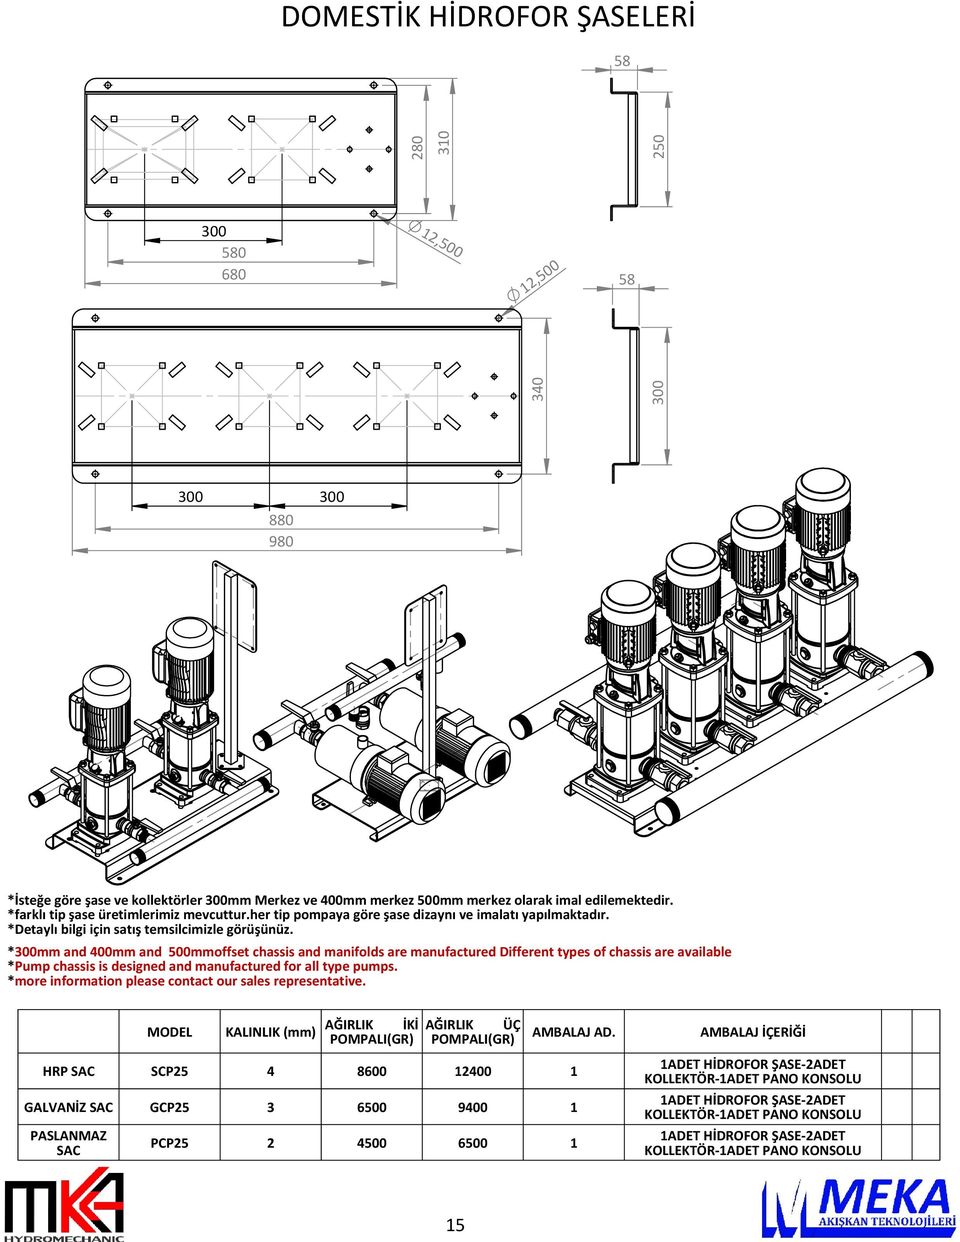 *300mm and 400mm and 500mmoffset chassis and manifolds are manufactured Different types of chassis are available *Pump chassis is designed and manufactured for all type pumps.